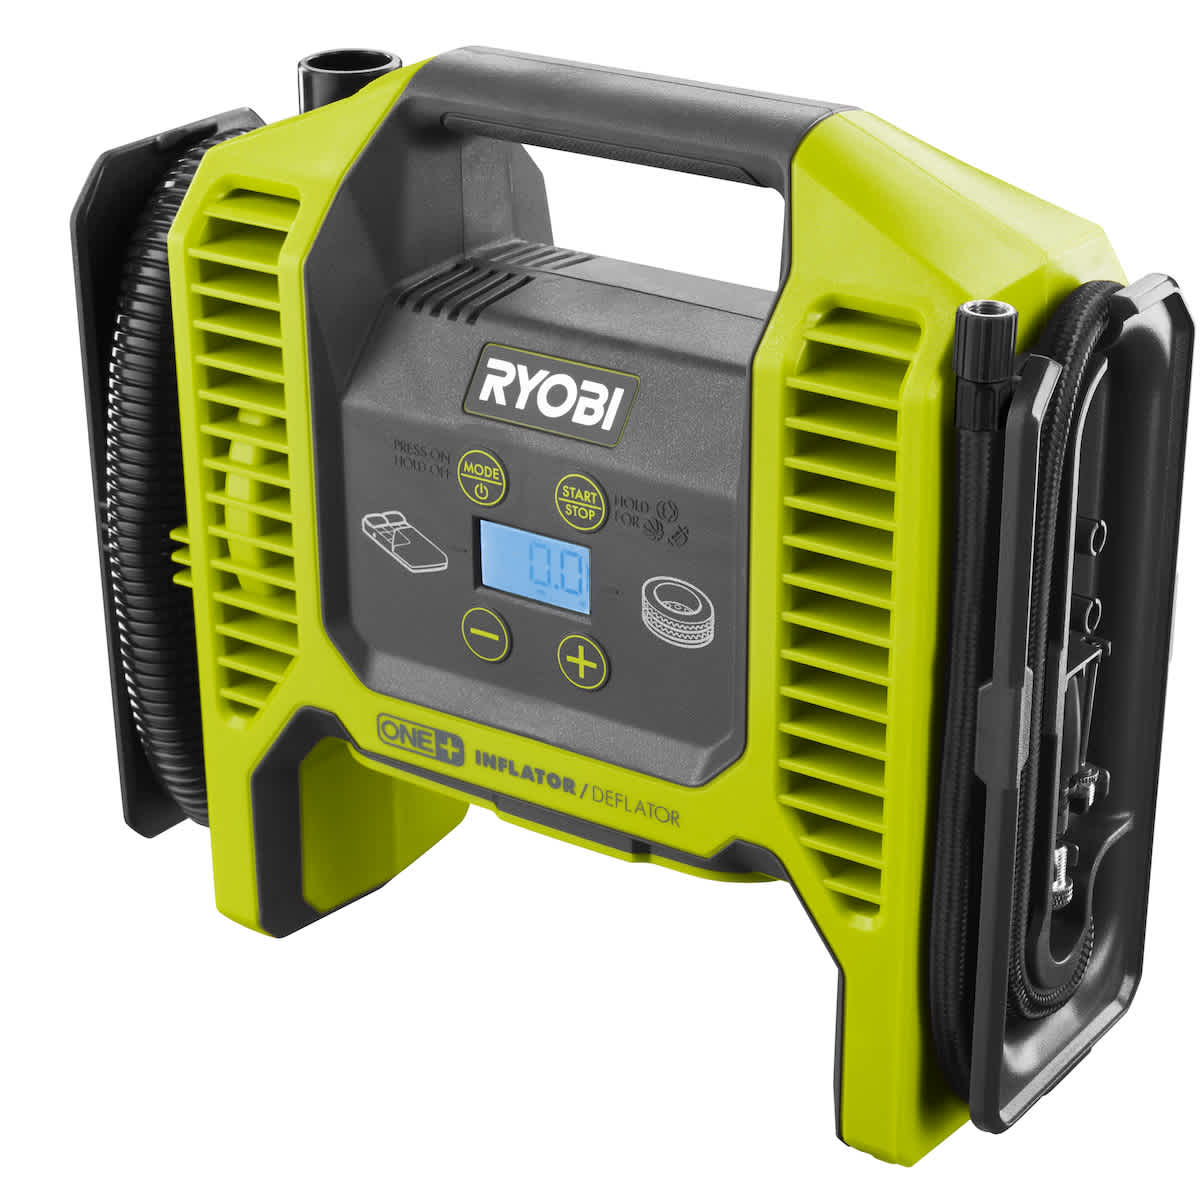 Feature Image for 18V ONE+™ DUAL FUNCTION INFLATOR/DEFLATOR.